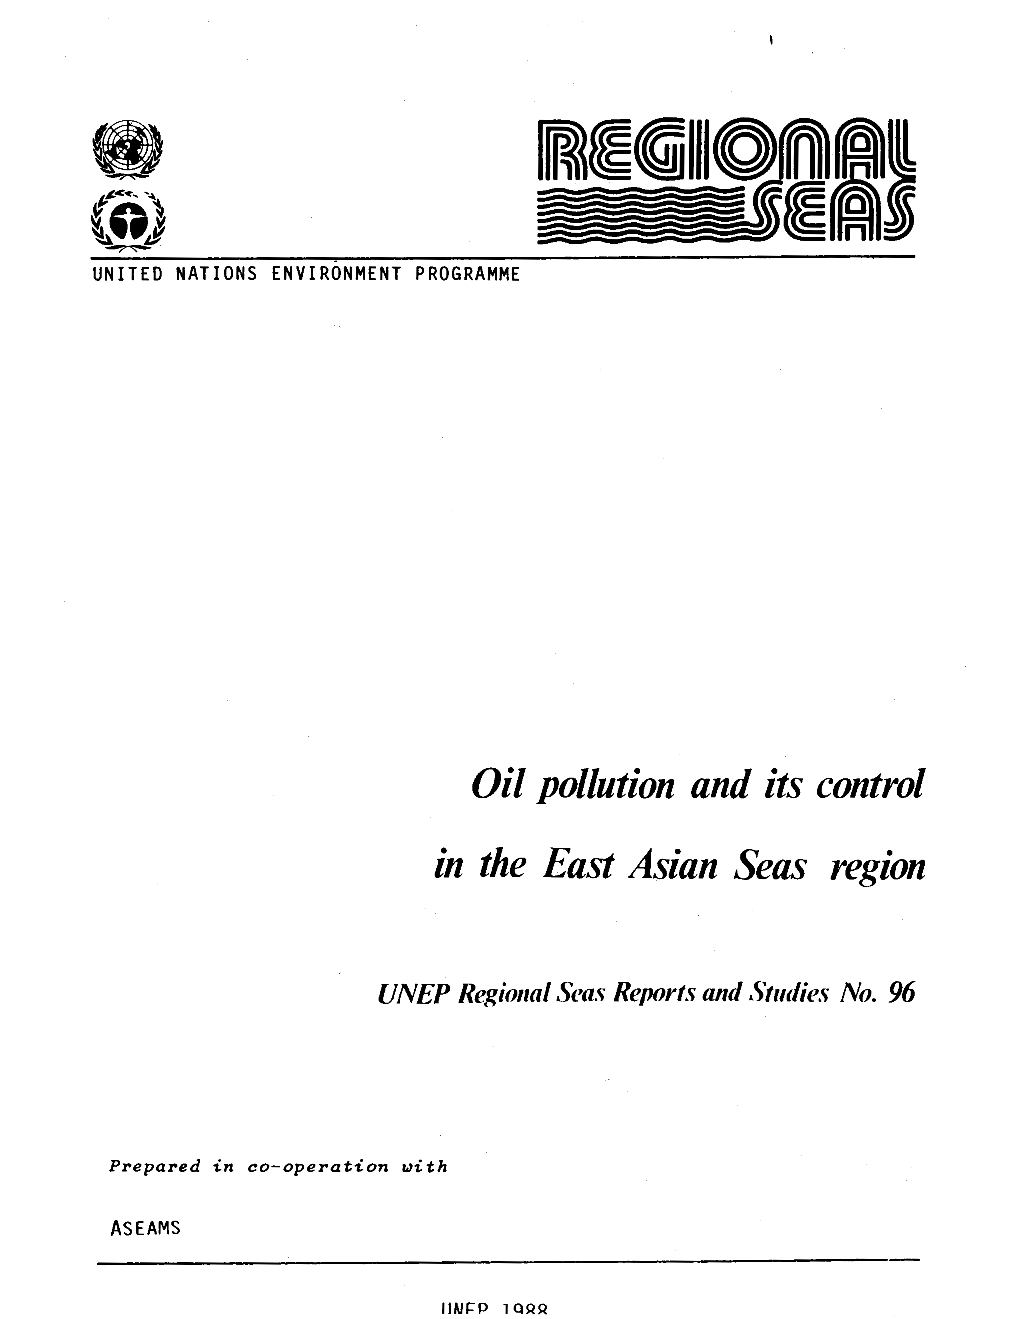 Oil Pollution and Its Control in the East Asian Sea Region